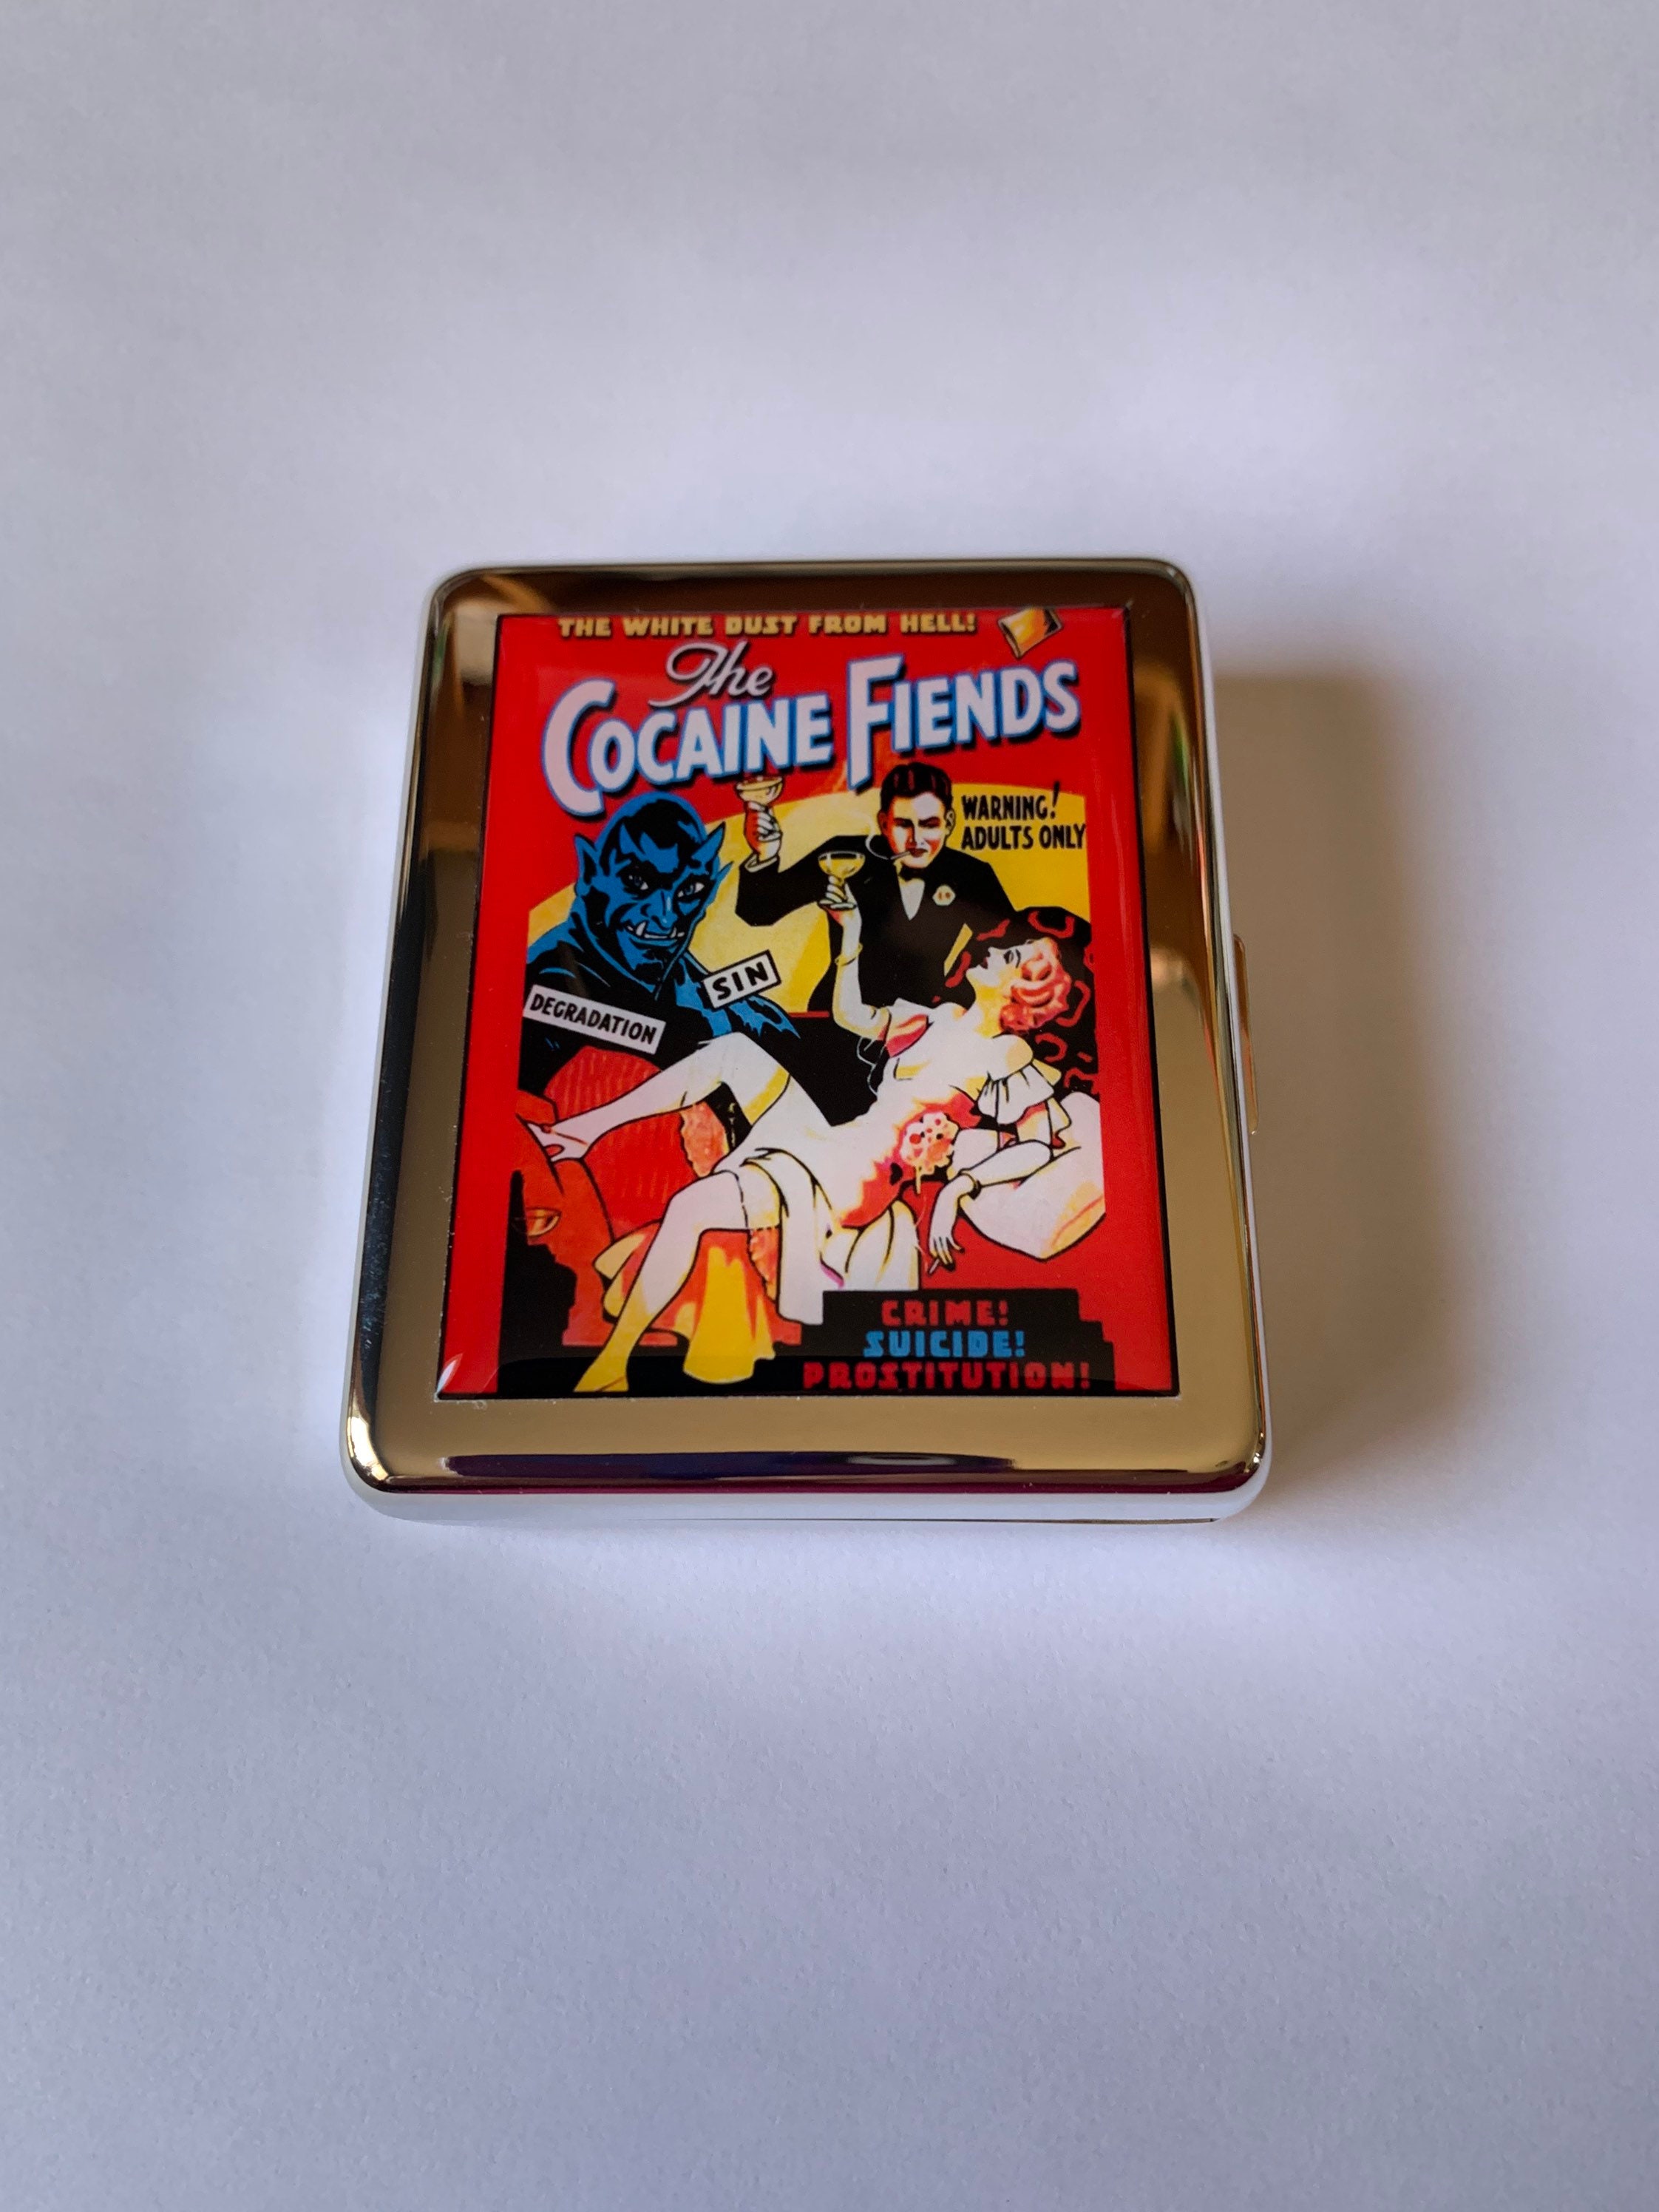 Cocaine Fiends Vintage Poster 7 day Pill Box with Mirror